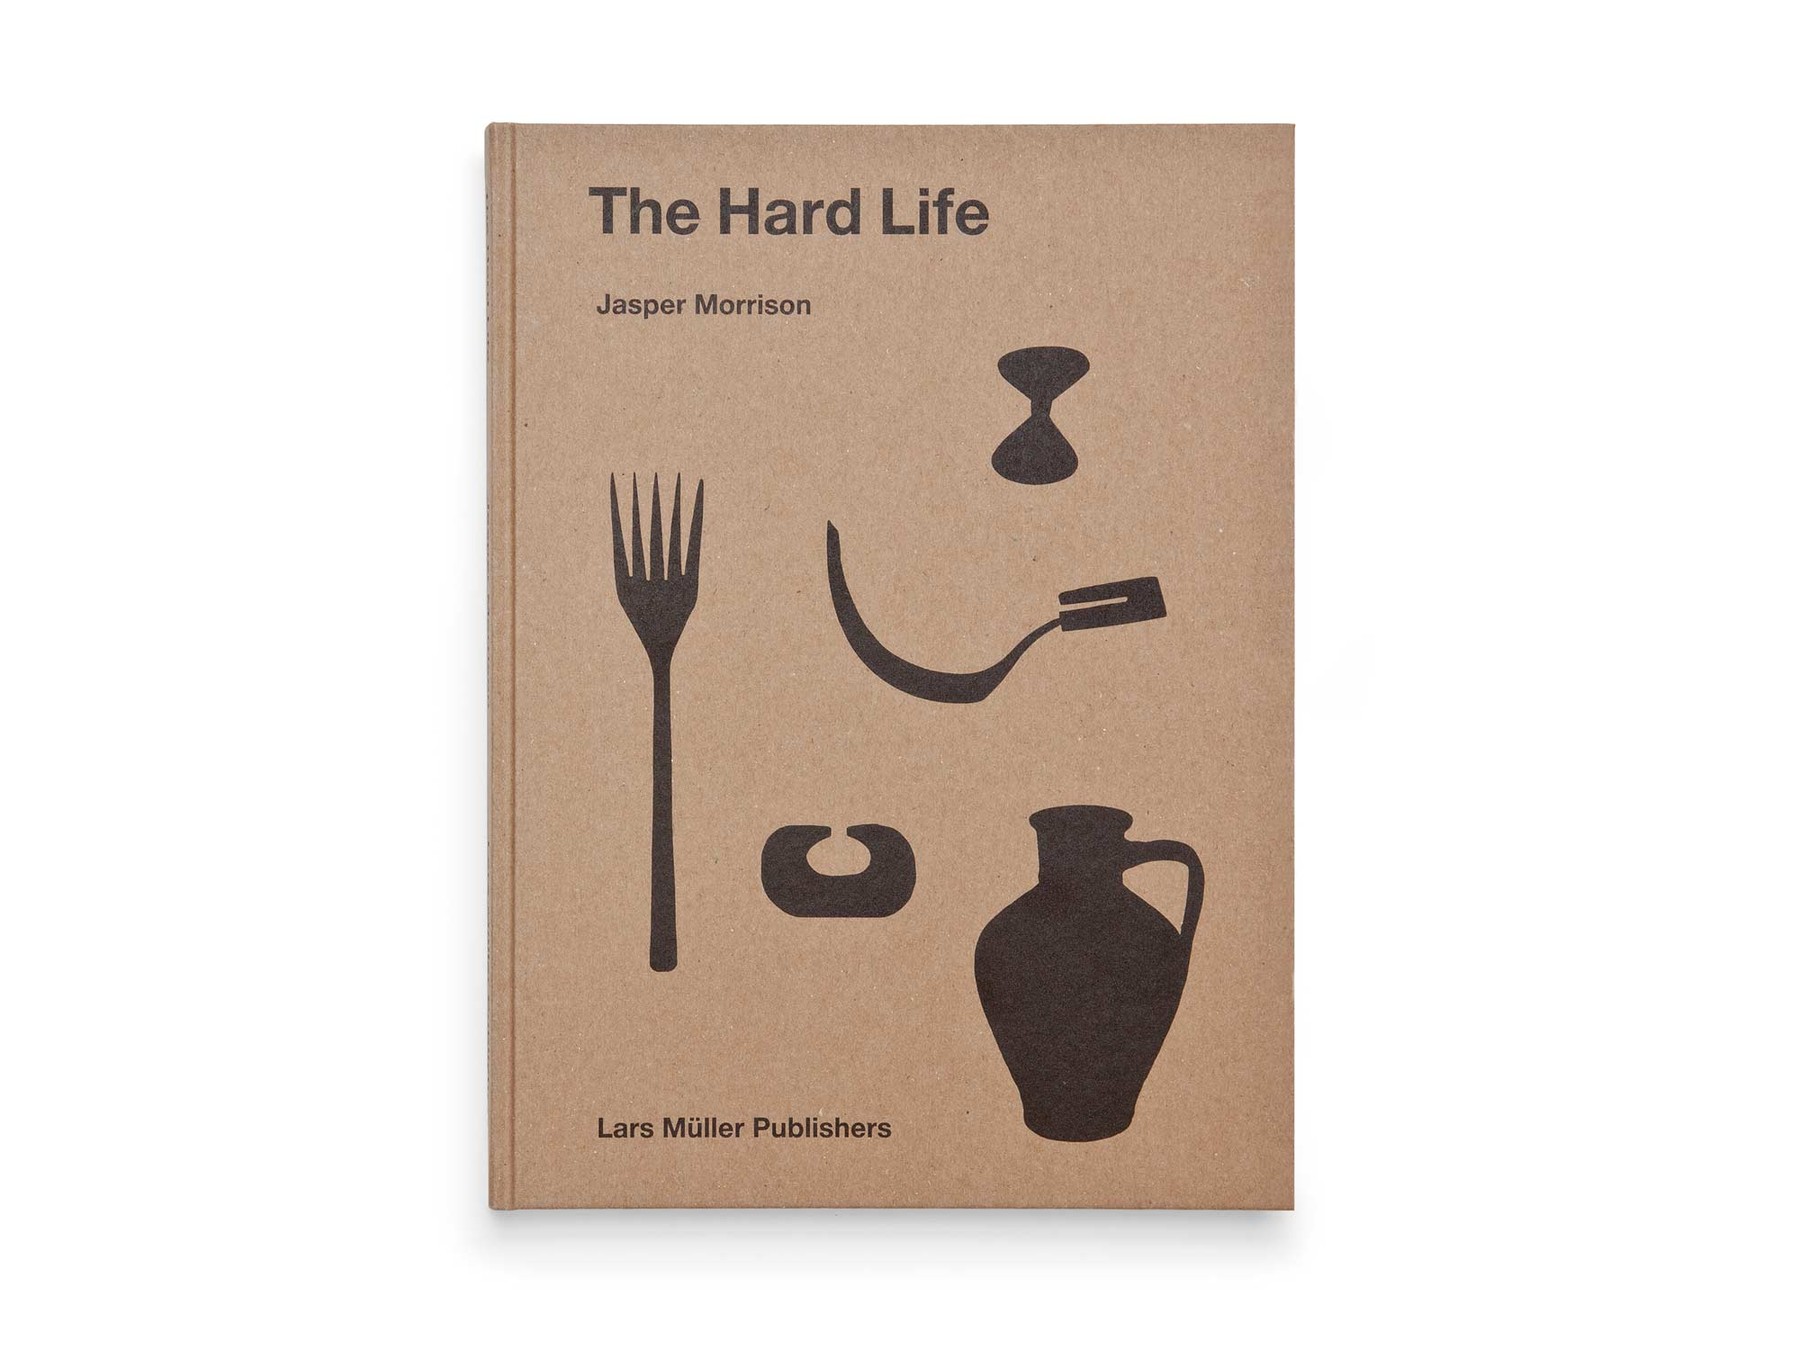 00_projects_publications_lars_muller_the_hard_life.jpeg